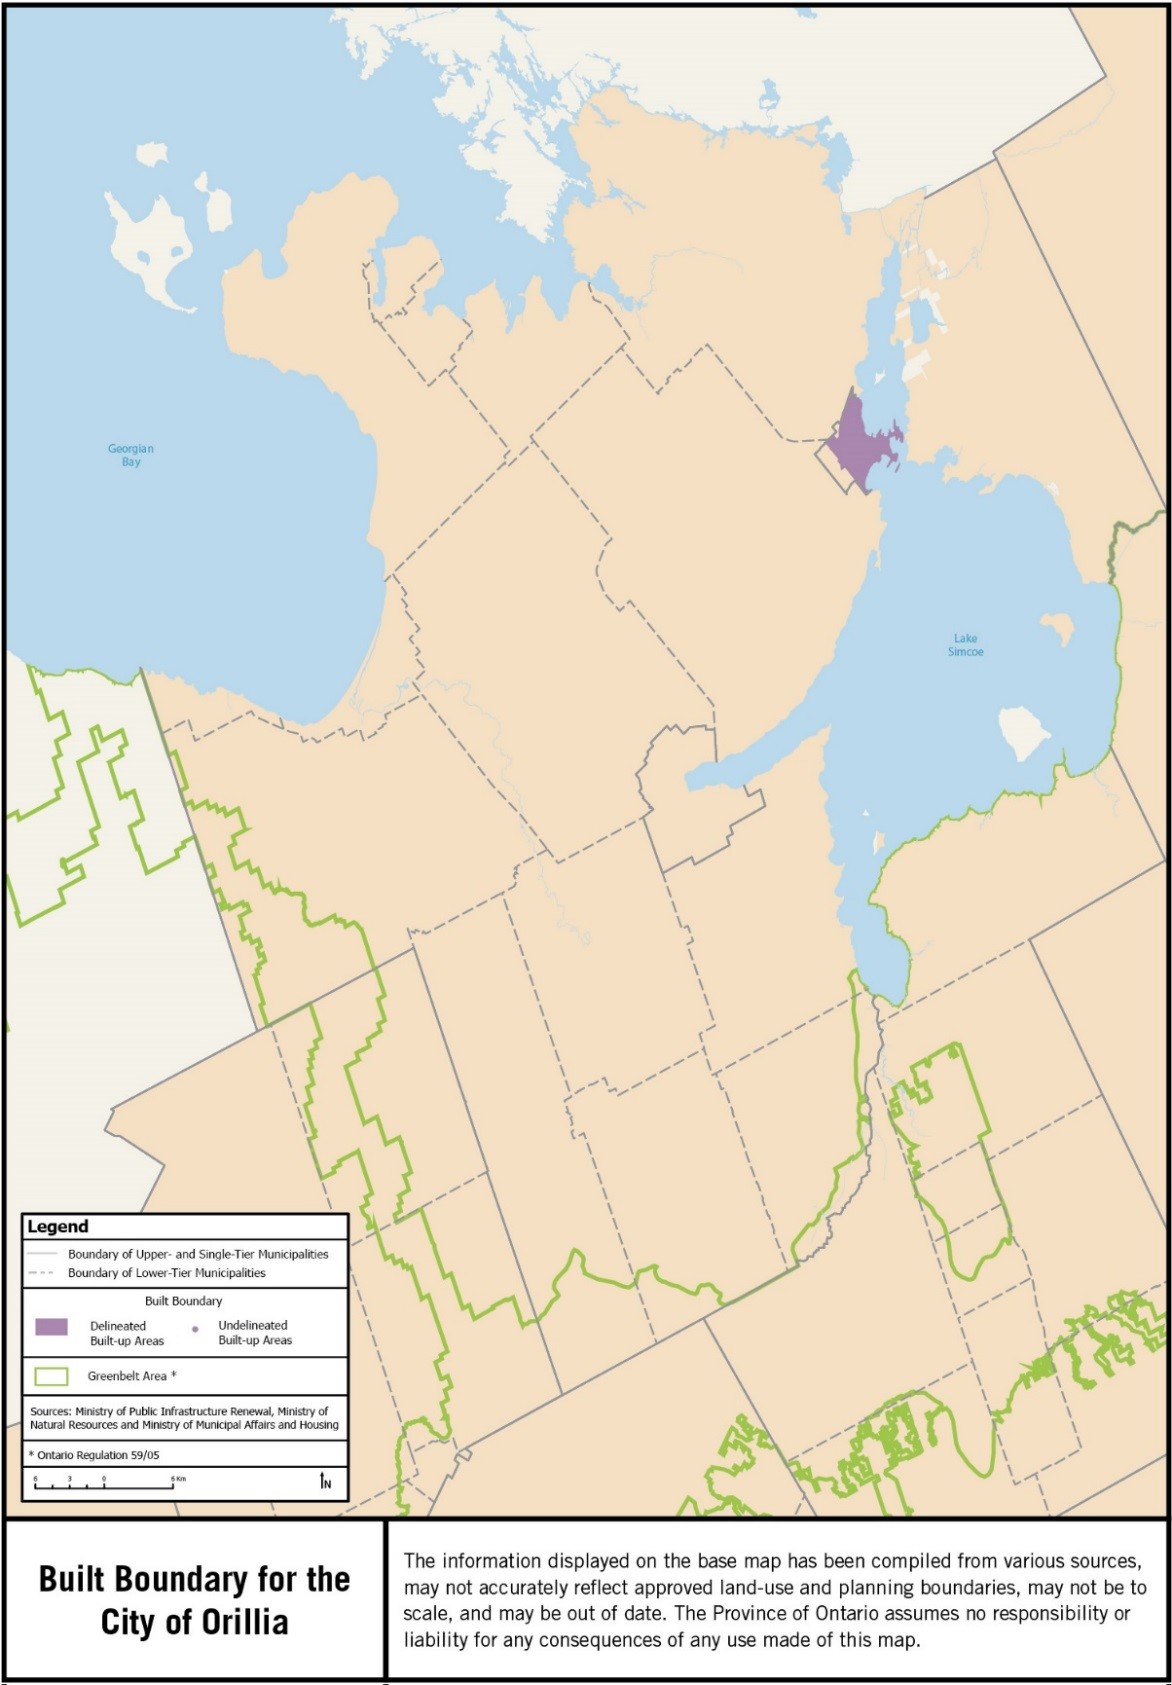 Map showing the built boundary for the City of Orillia.